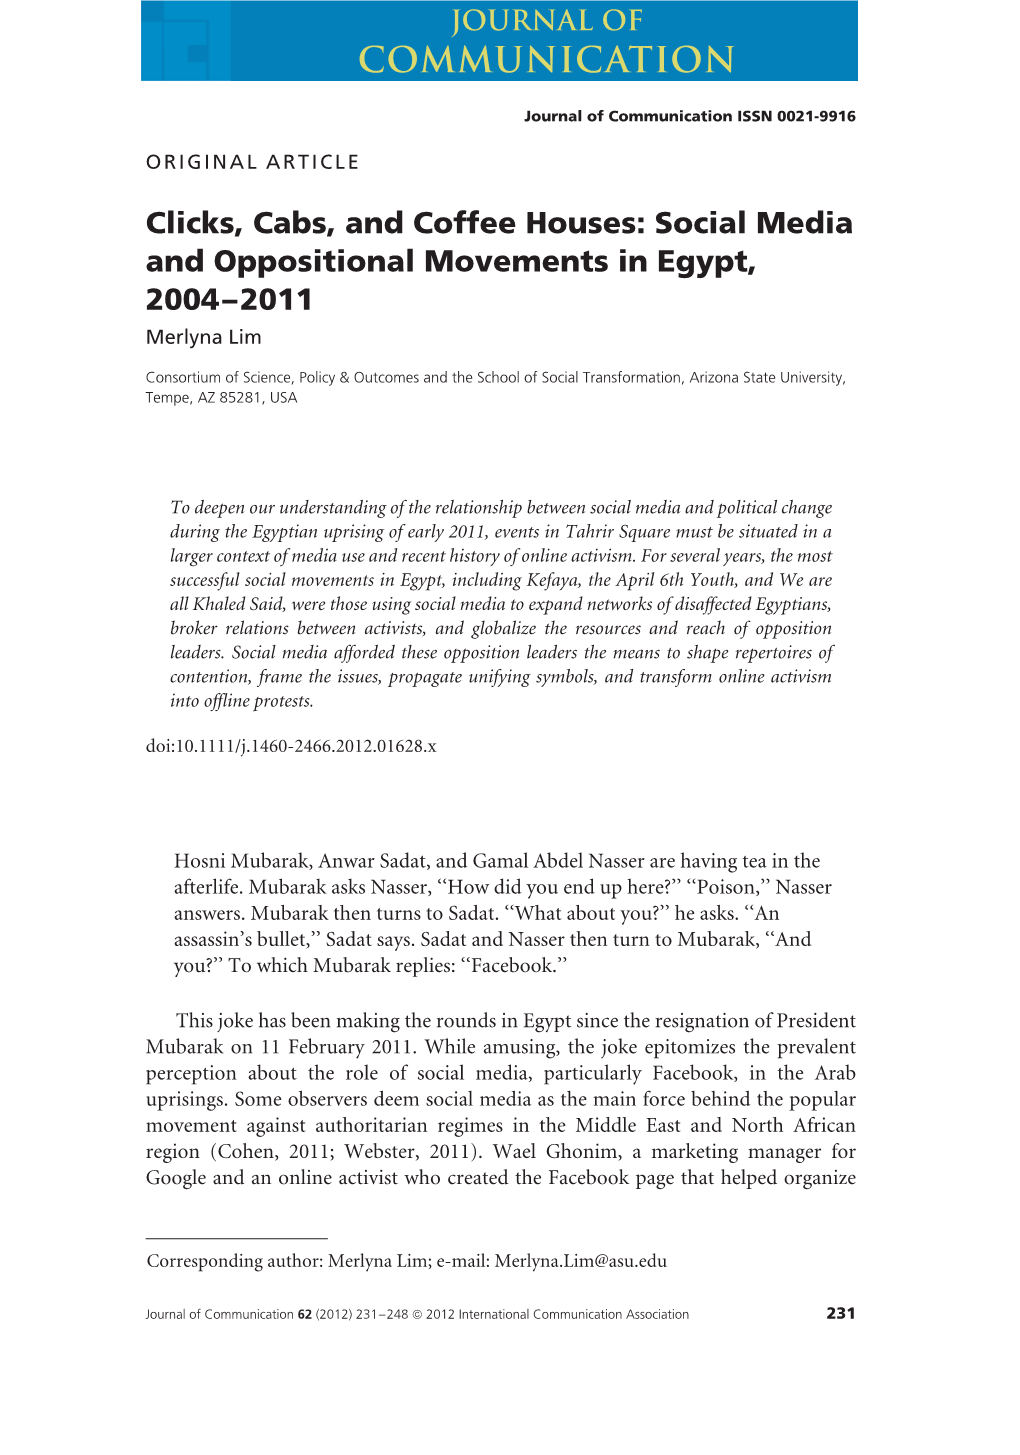 Clicks, Cabs, and Coffee Houses: Social Media and Oppositional Movements in Egypt, 20042011